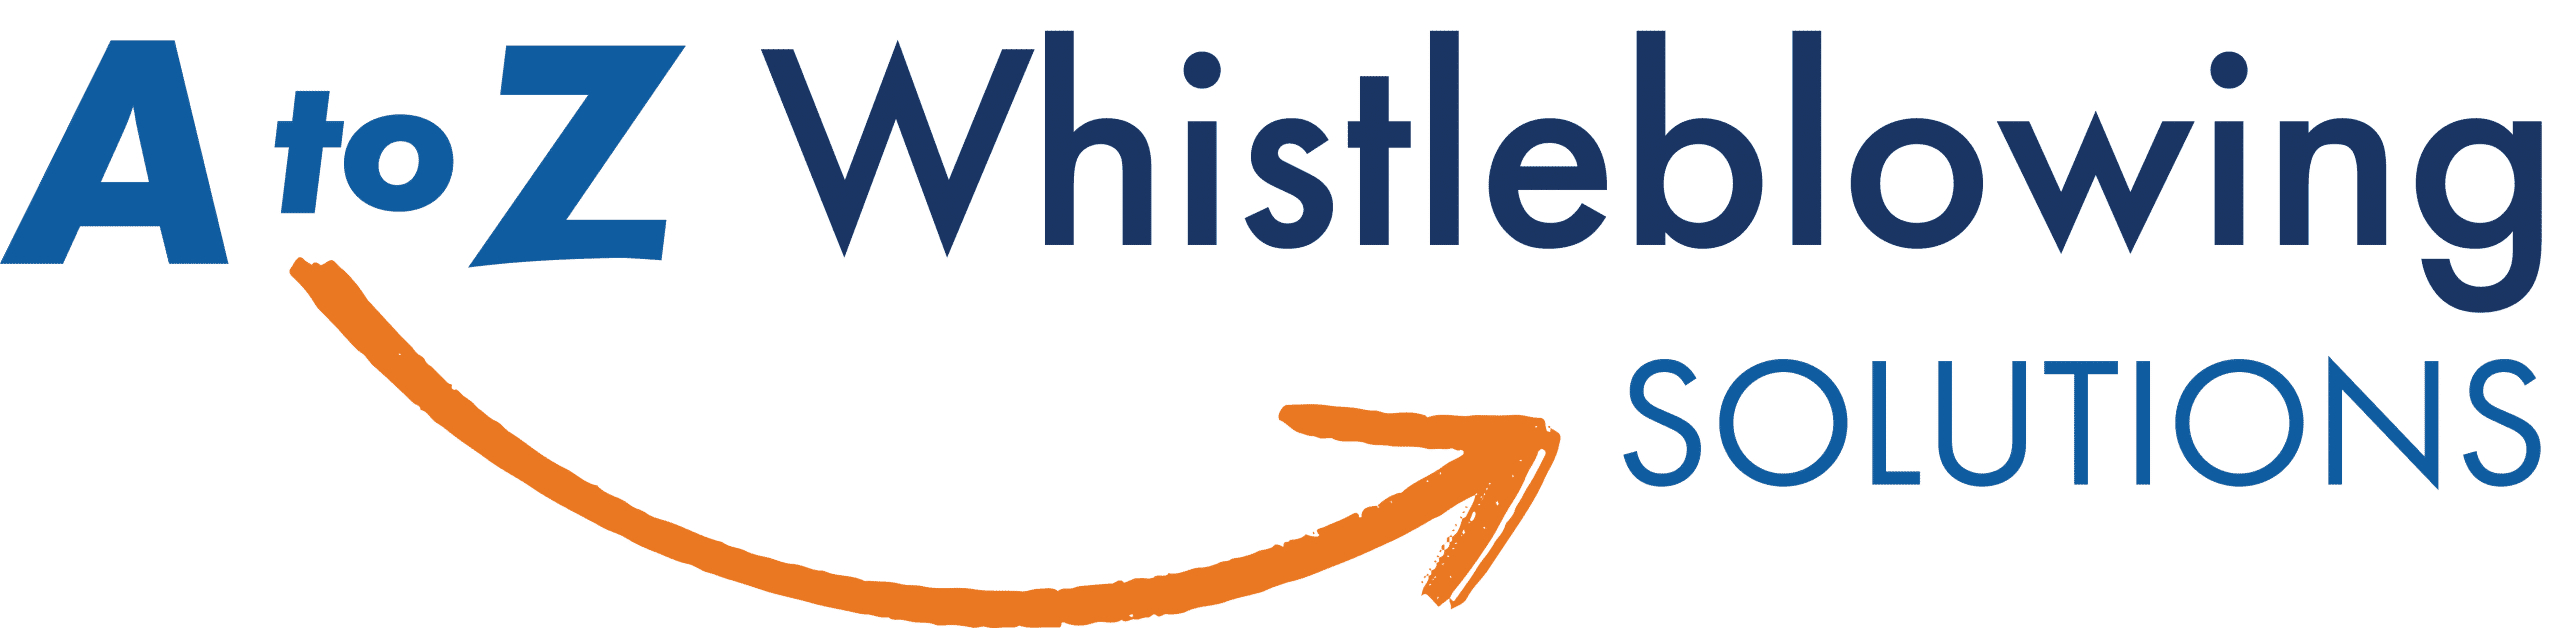 Logo A to Z Whistleblowing Solutions